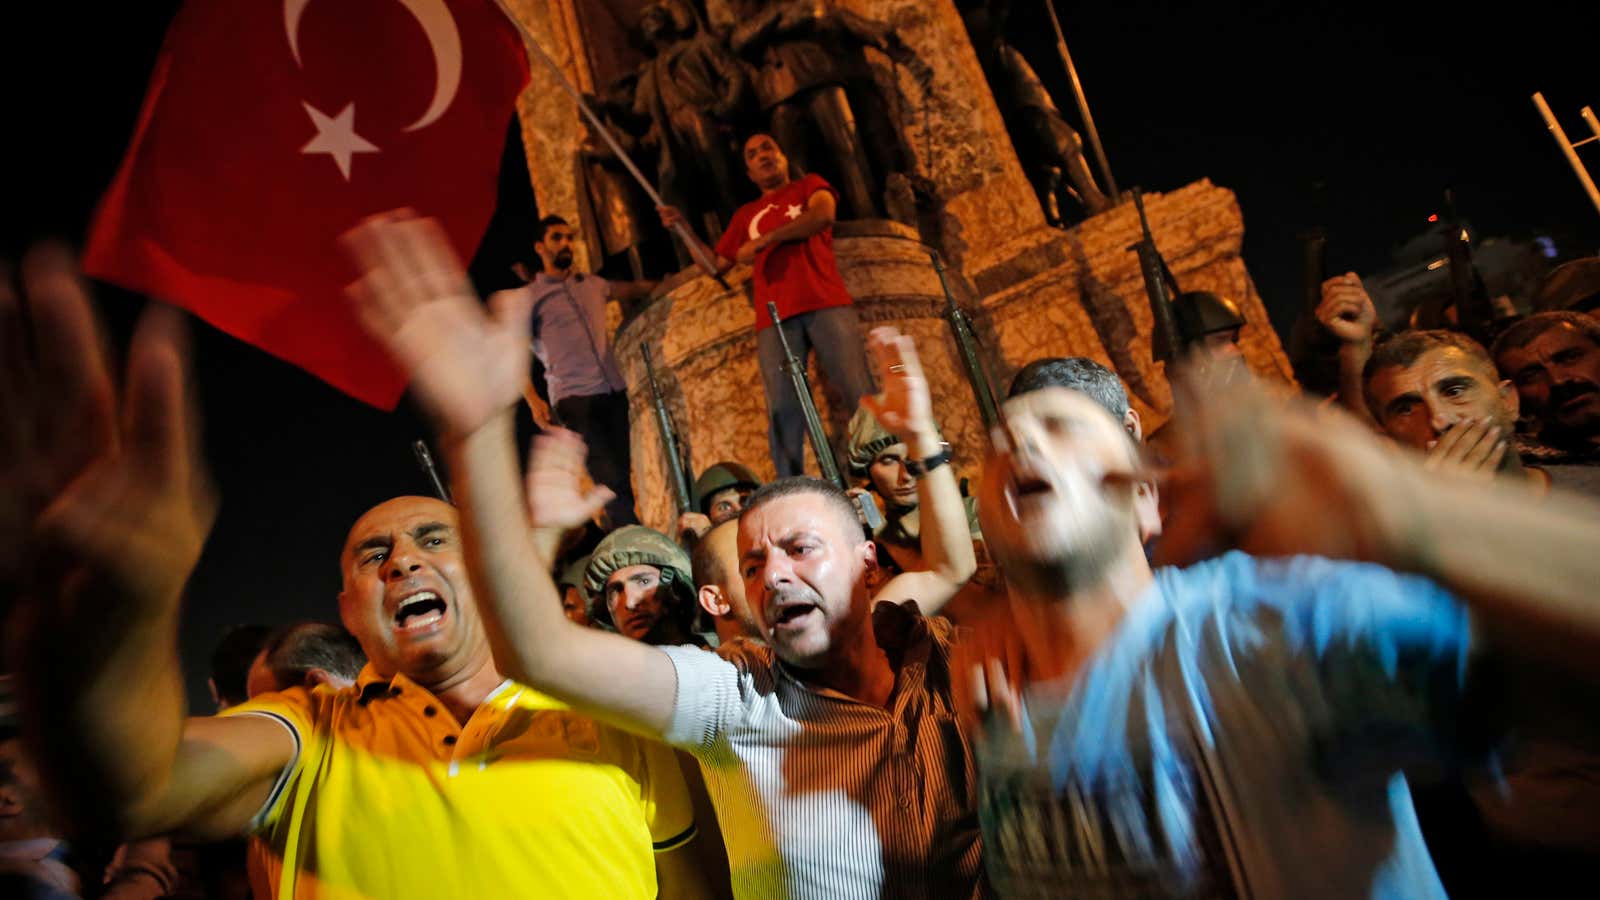 Supporters of Turkey’s President Recep Tayyip Erdogan, protest in front of soldiers in Istanbul’s Taksim square.